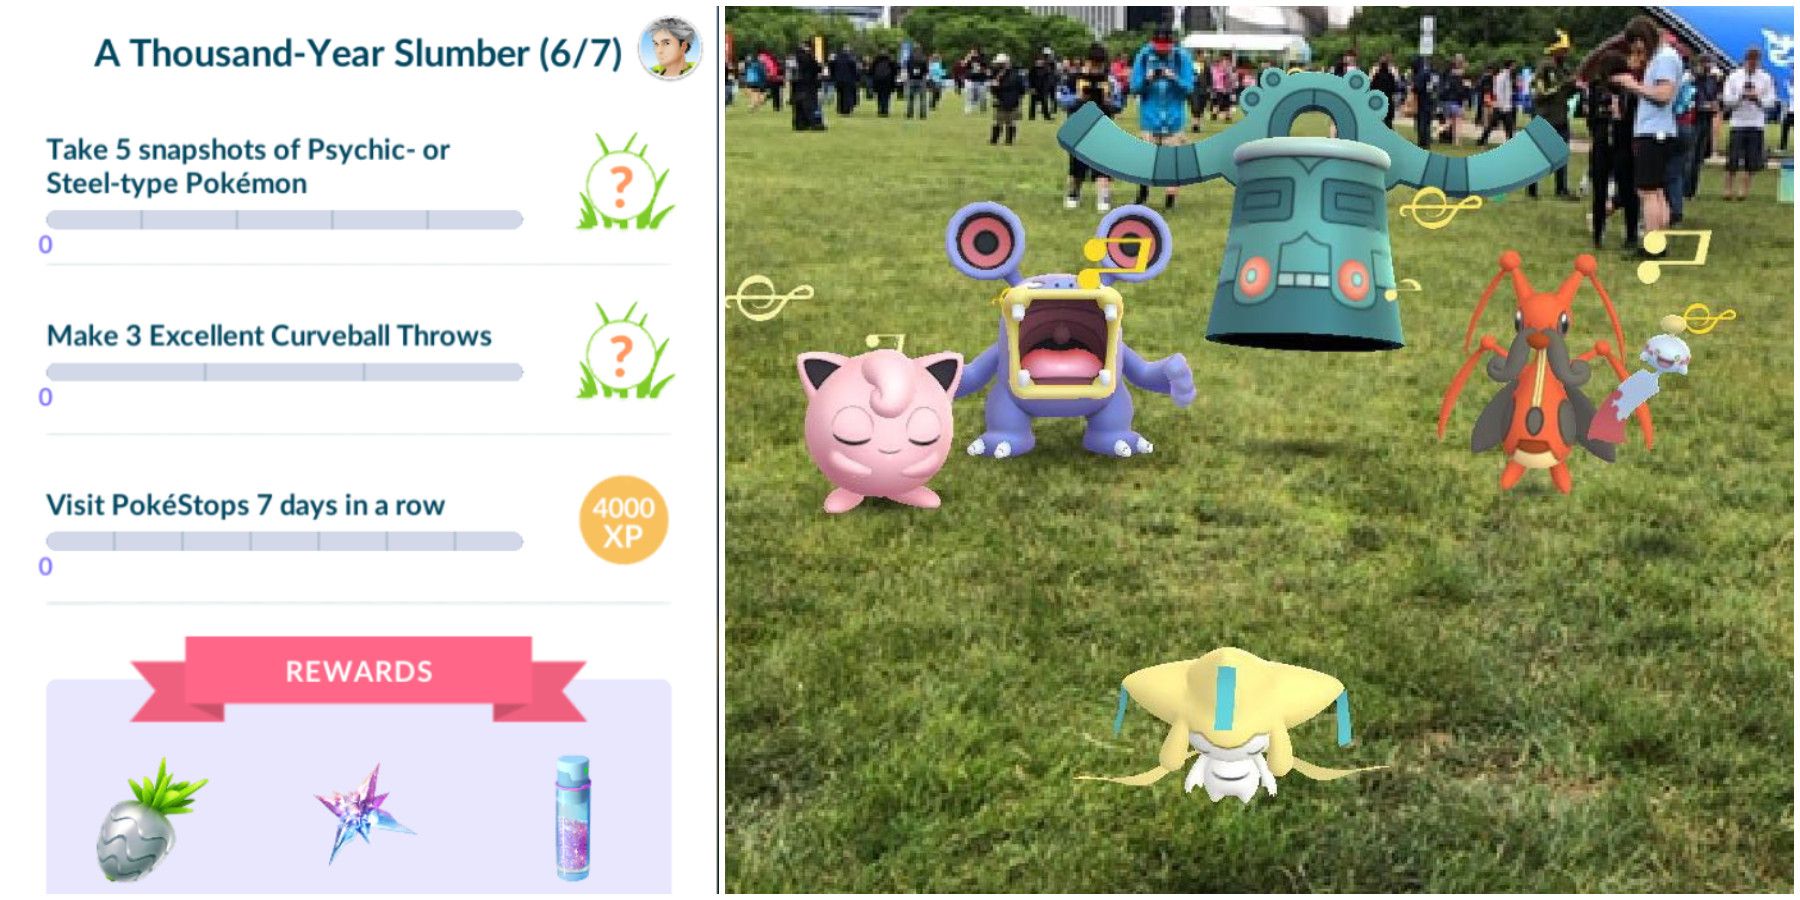 Easy Way to Catch Mew in Pokemon Go  Complete Guide on Special Research &  Quests in Pokemon GO 